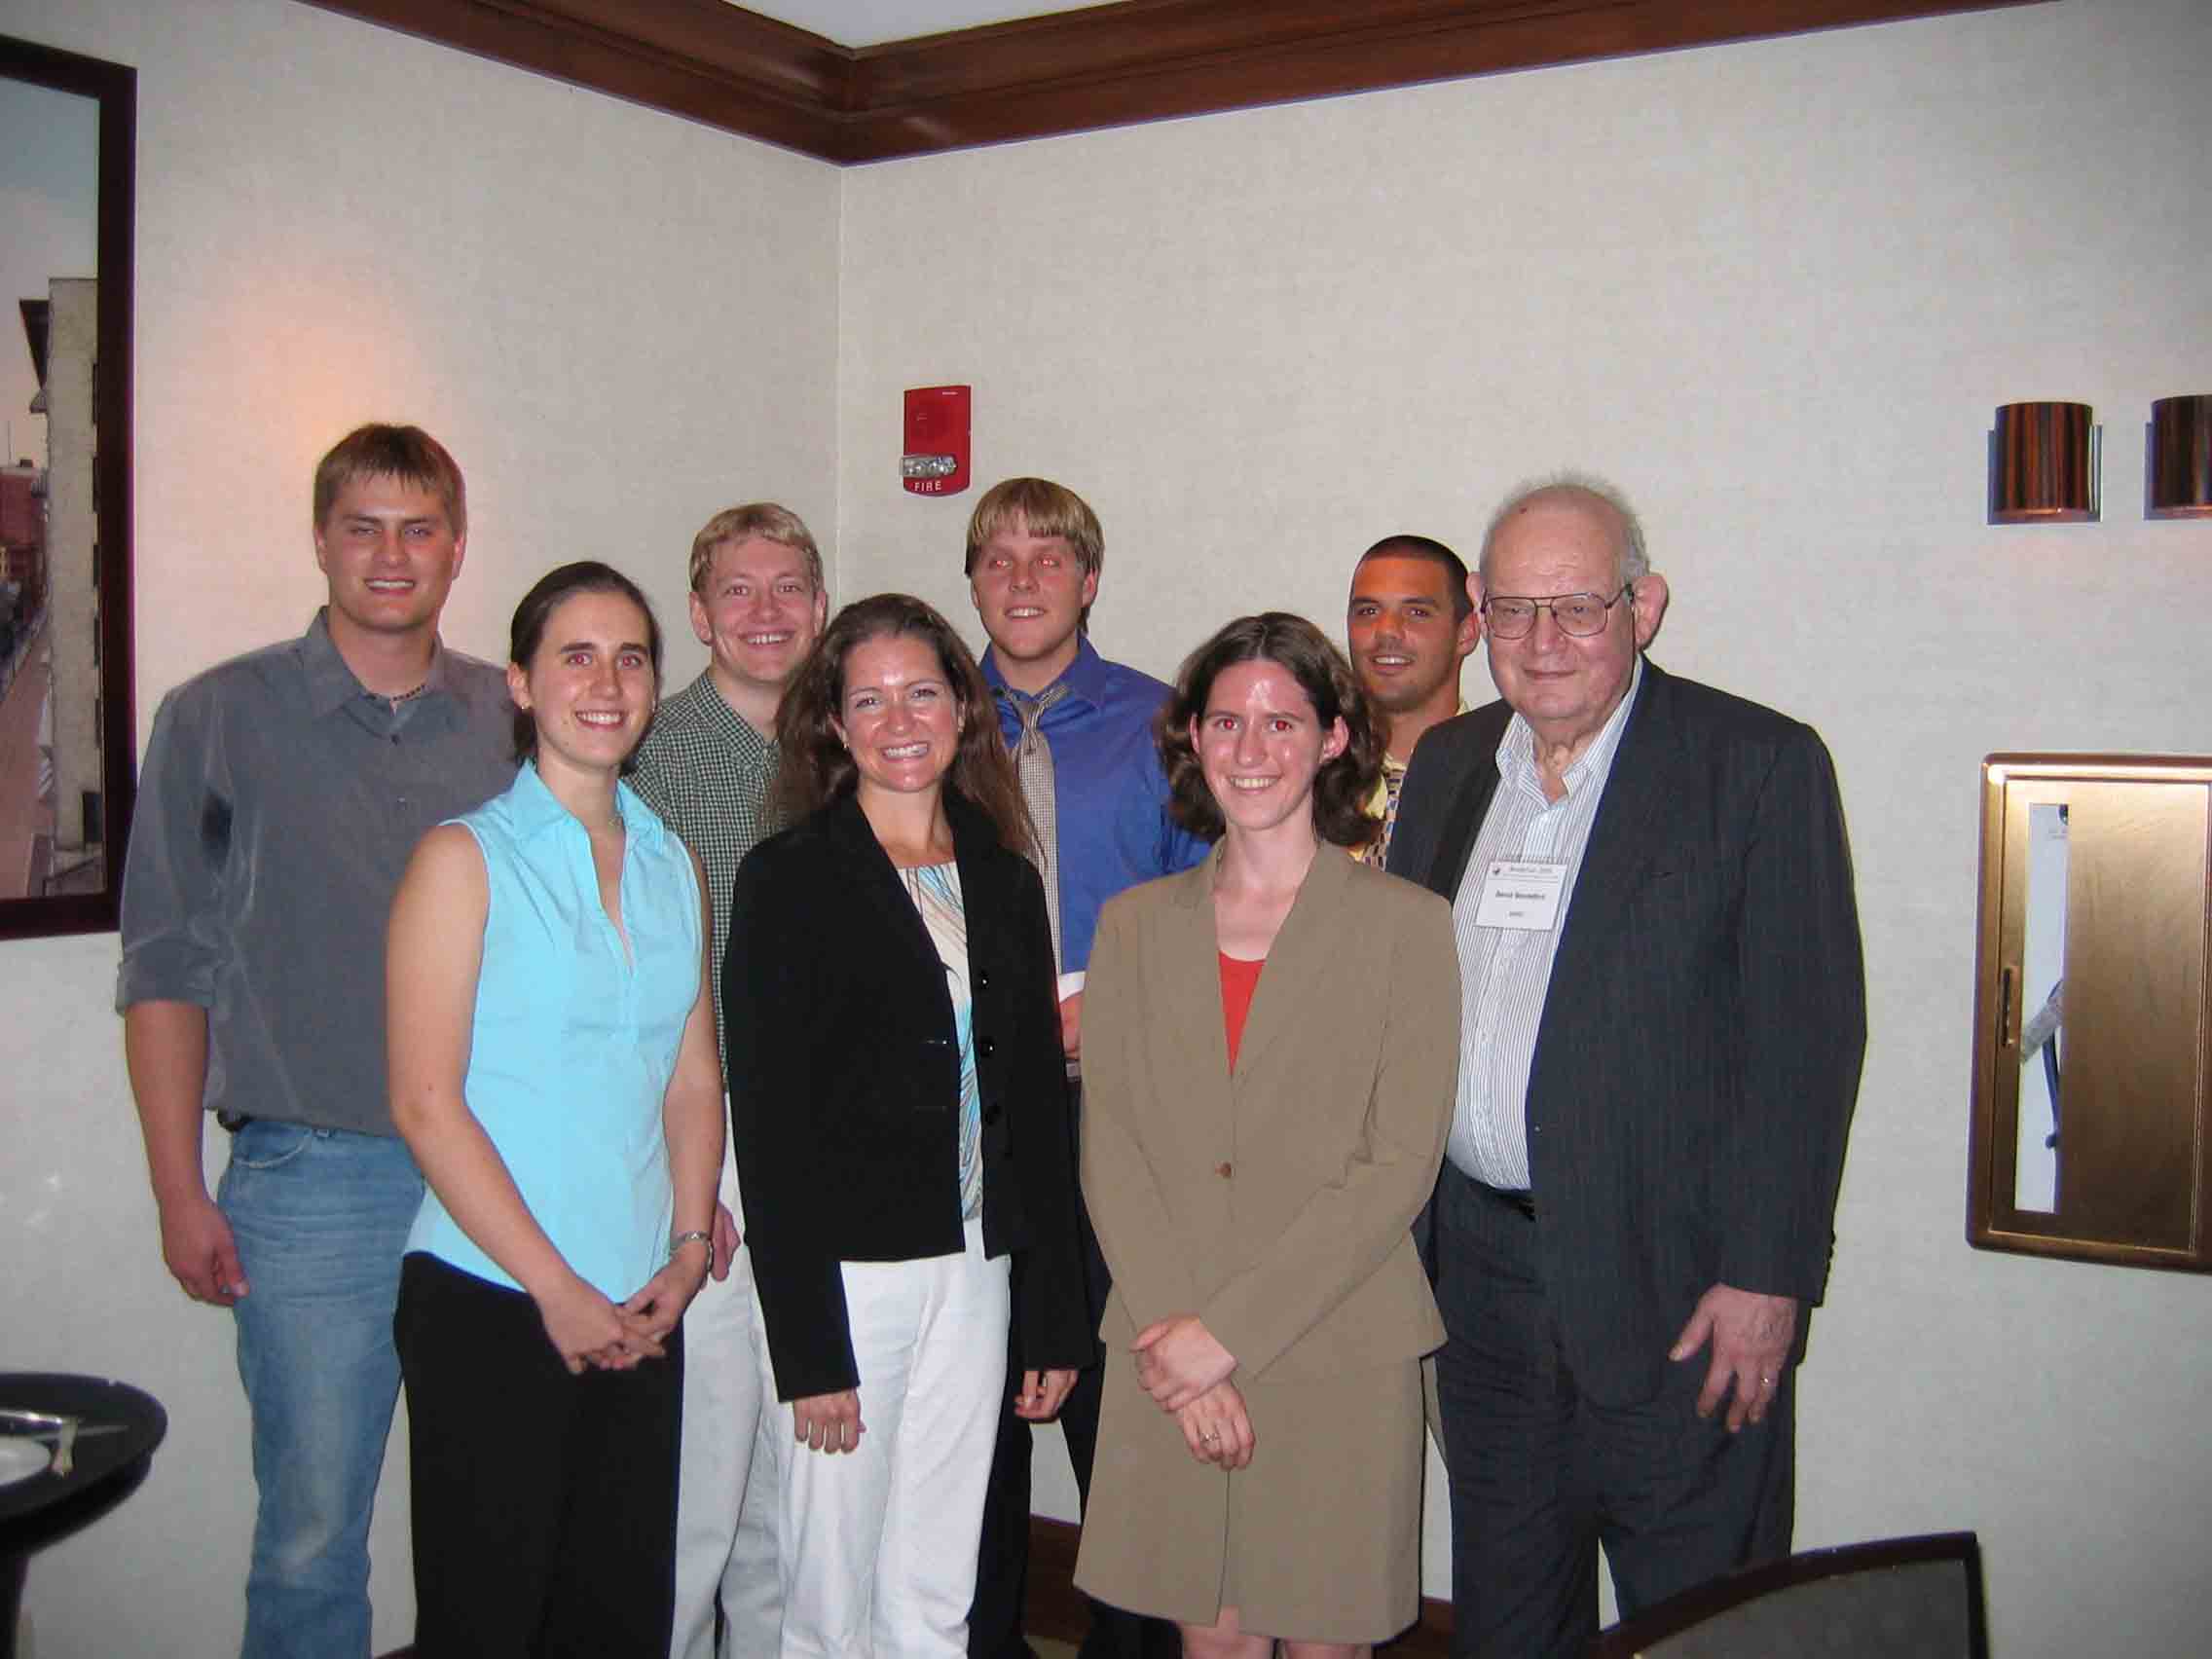 Some of the Best-in-Session award winners with Prof. Benoit Mandelbrot